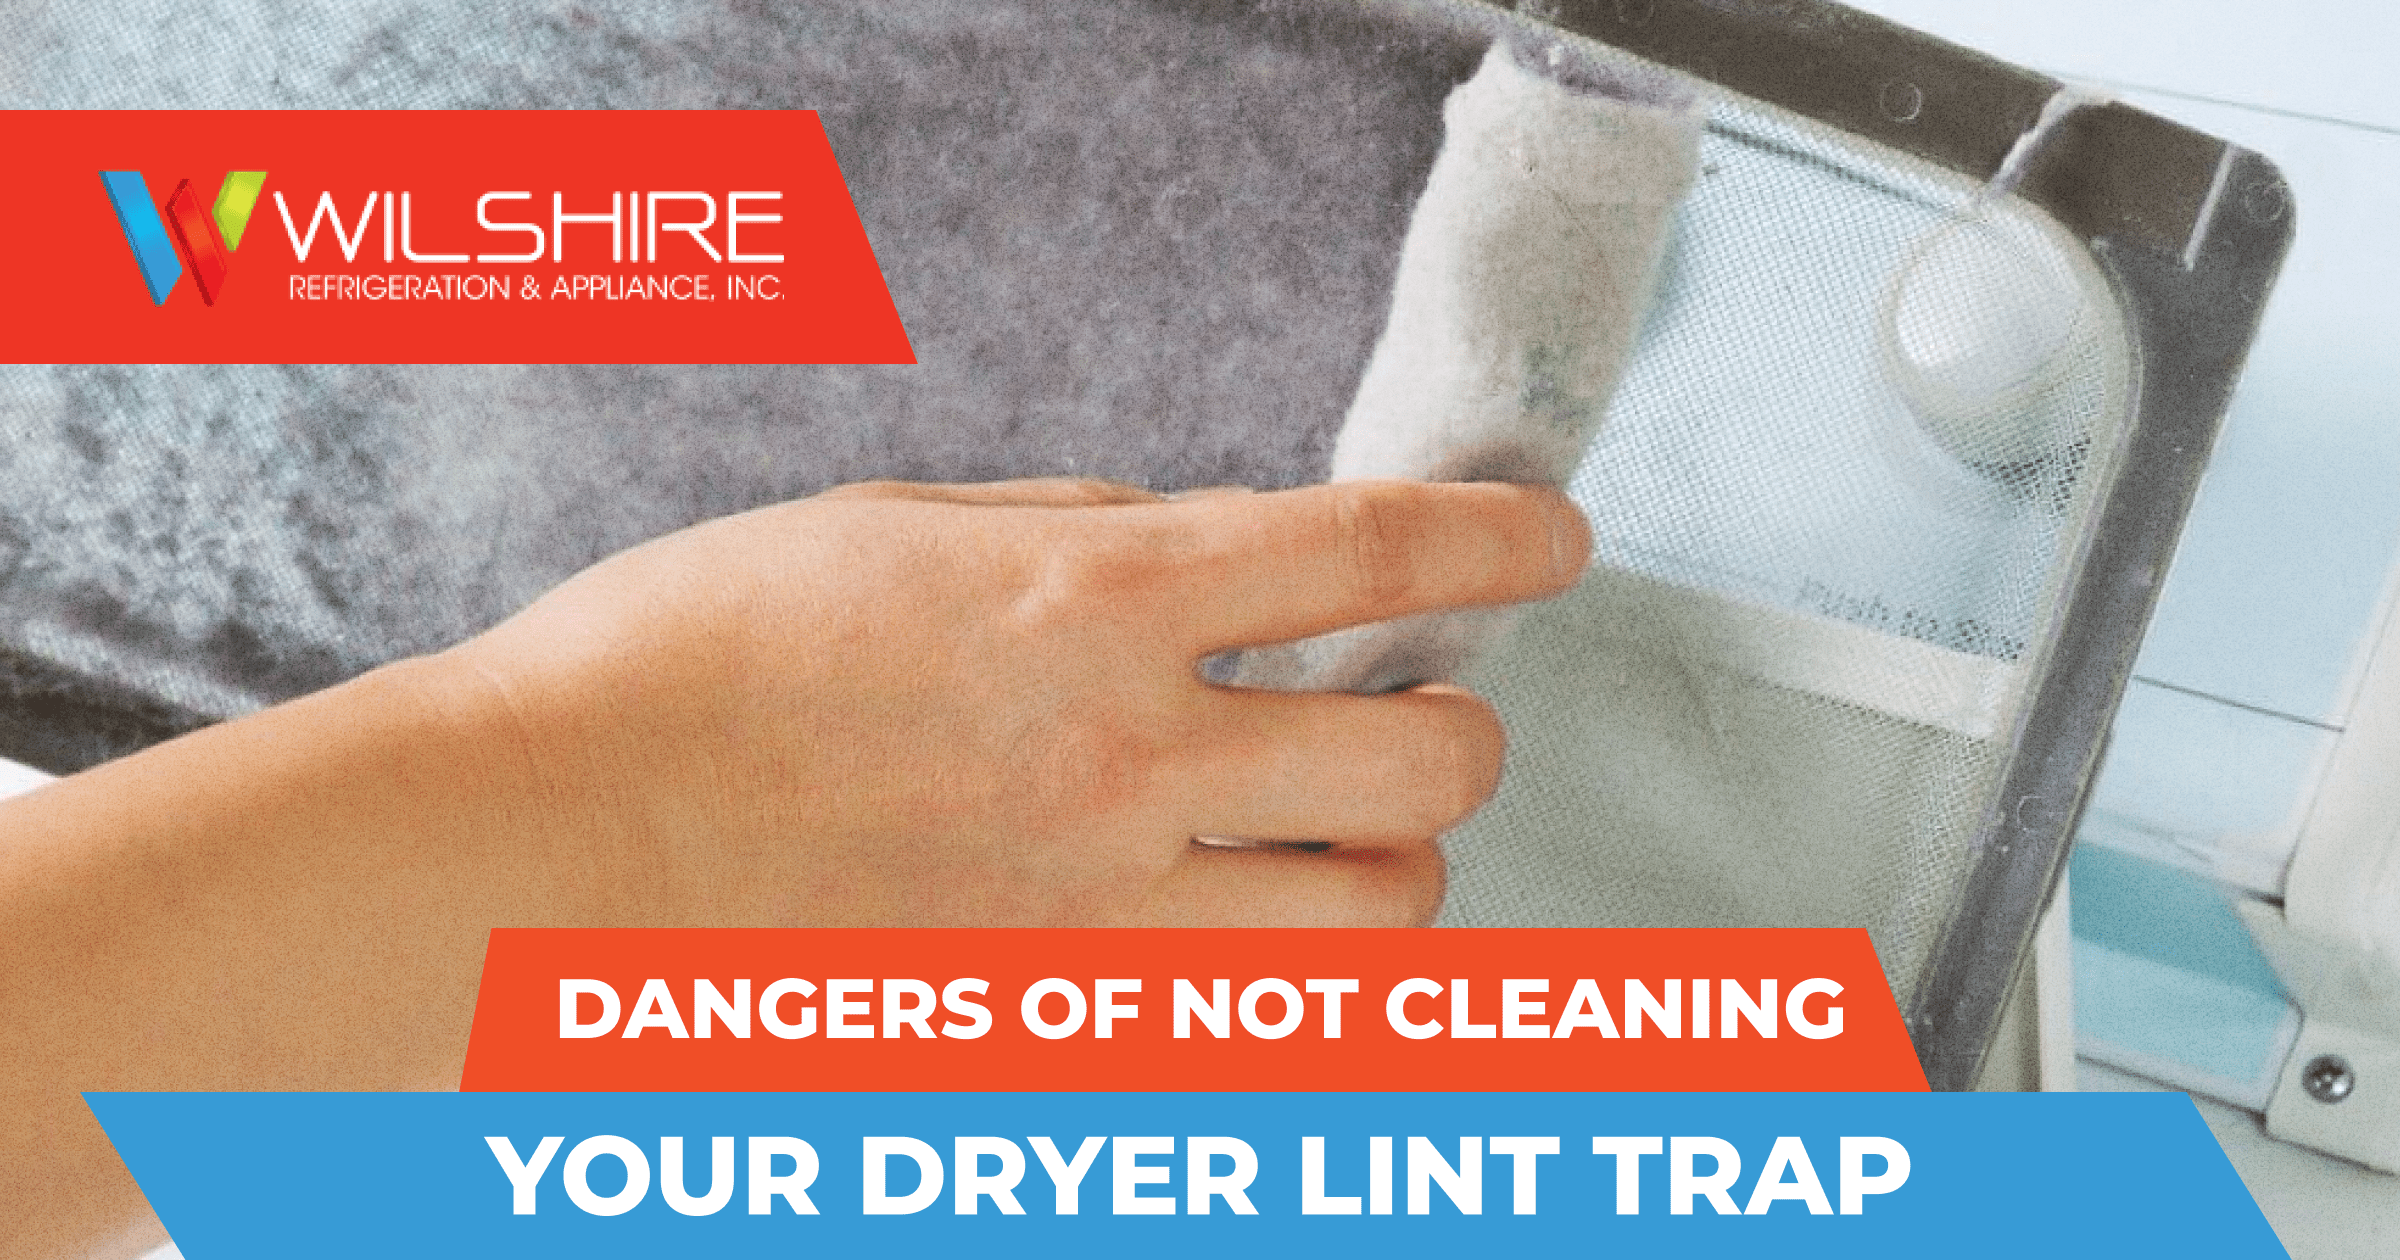 The Dangers of Not Cleaning Your Dryer Vent & Dryer Lint Trap